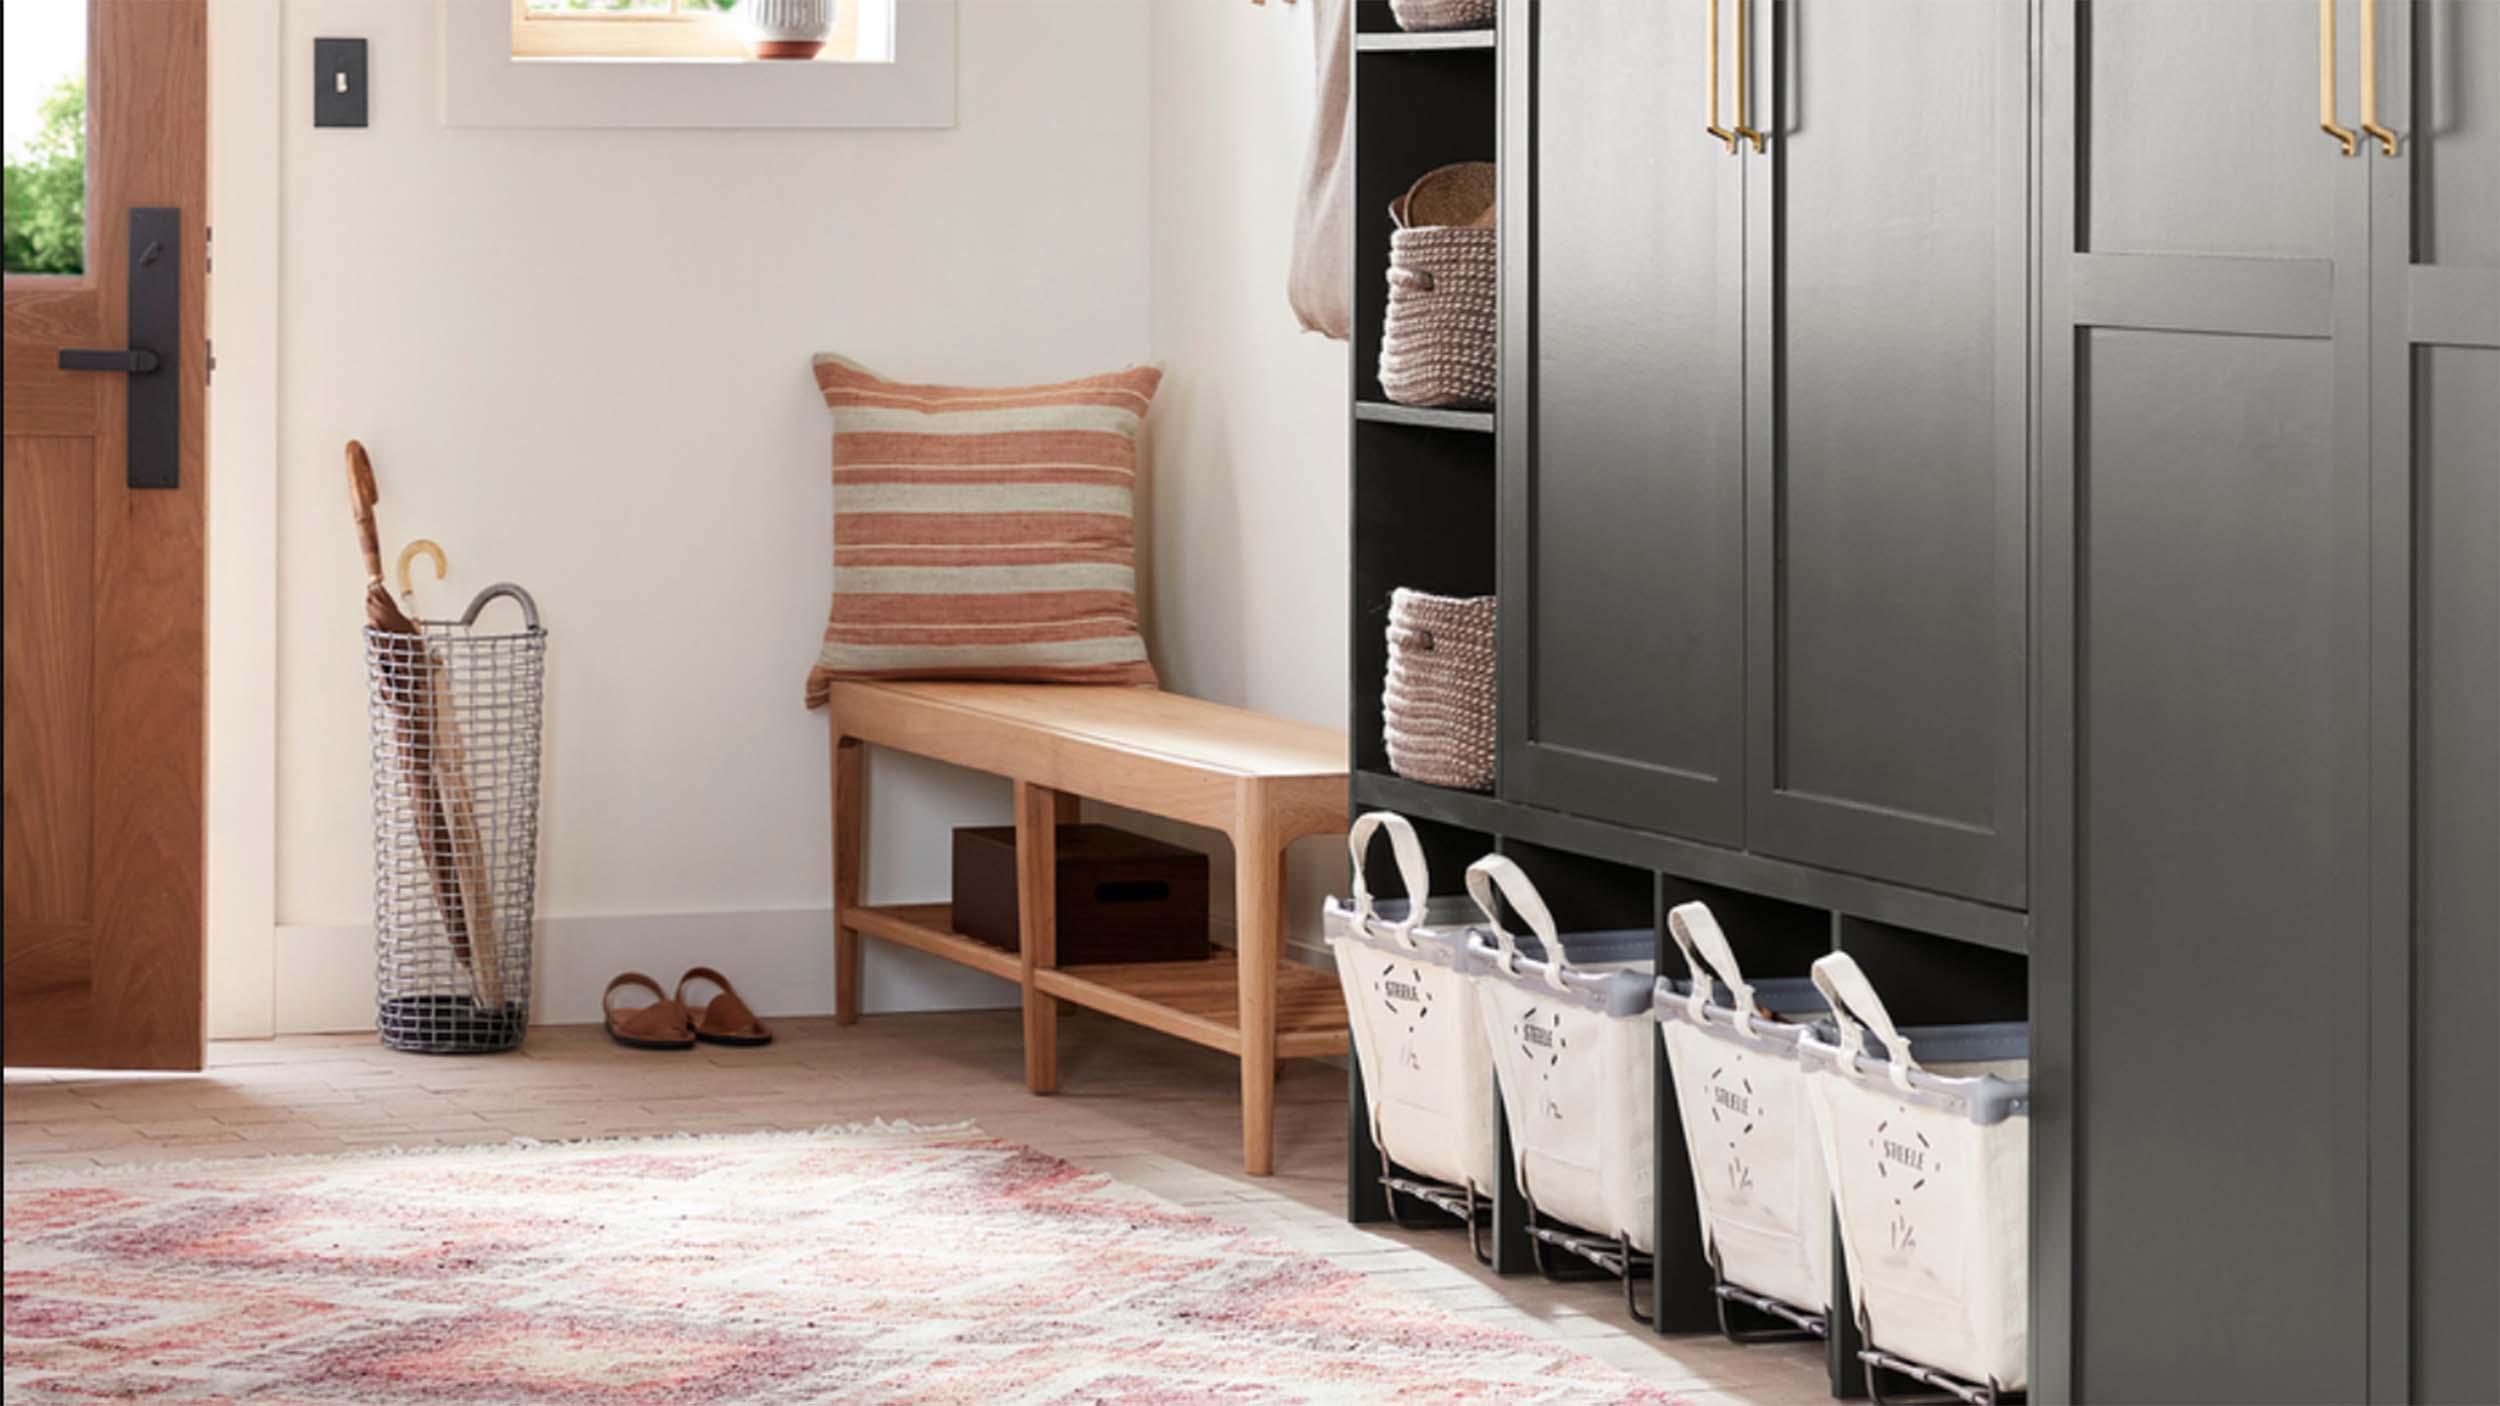 7 Narrow Entryway Storage Ideas for Any Space